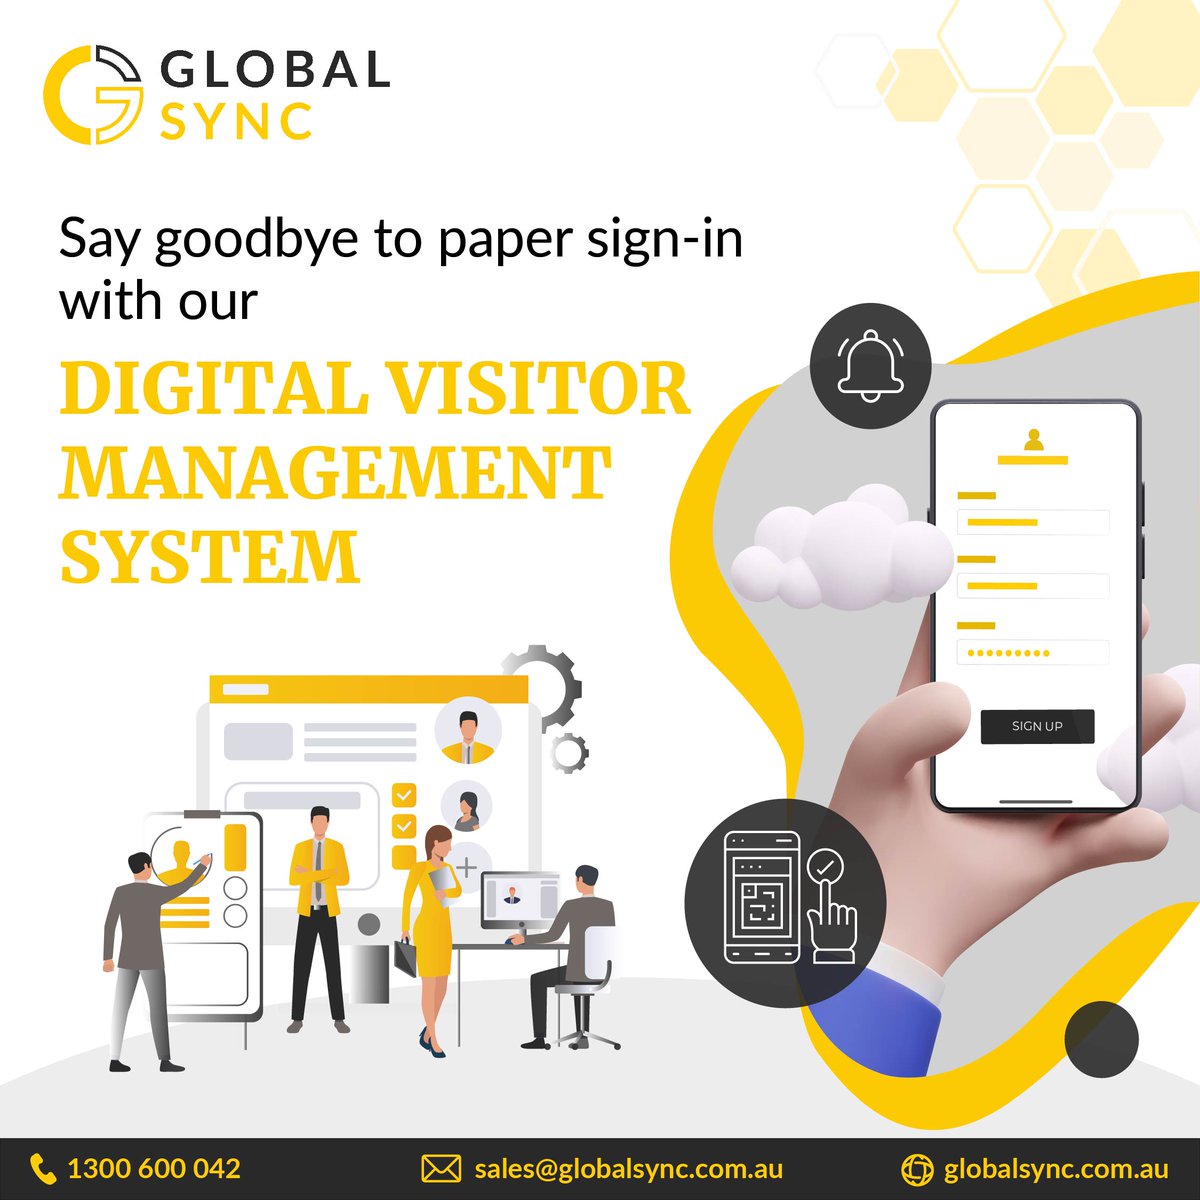 Say goodbye to the hassle of paper sign-in and hello to more efficient & secure solution! Our #VisitorManagementSystem makes it quick and easy. 

To get our VMS free of cost!
𝐅𝐫𝐞𝐞 𝐒𝐢𝐠𝐧 𝐔𝐩: bit.ly/3wopFYK

To know more, call us at +𝟗𝟏𝟗𝟗𝟏𝟎𝟔𝟕𝟖𝟒𝟔𝟐